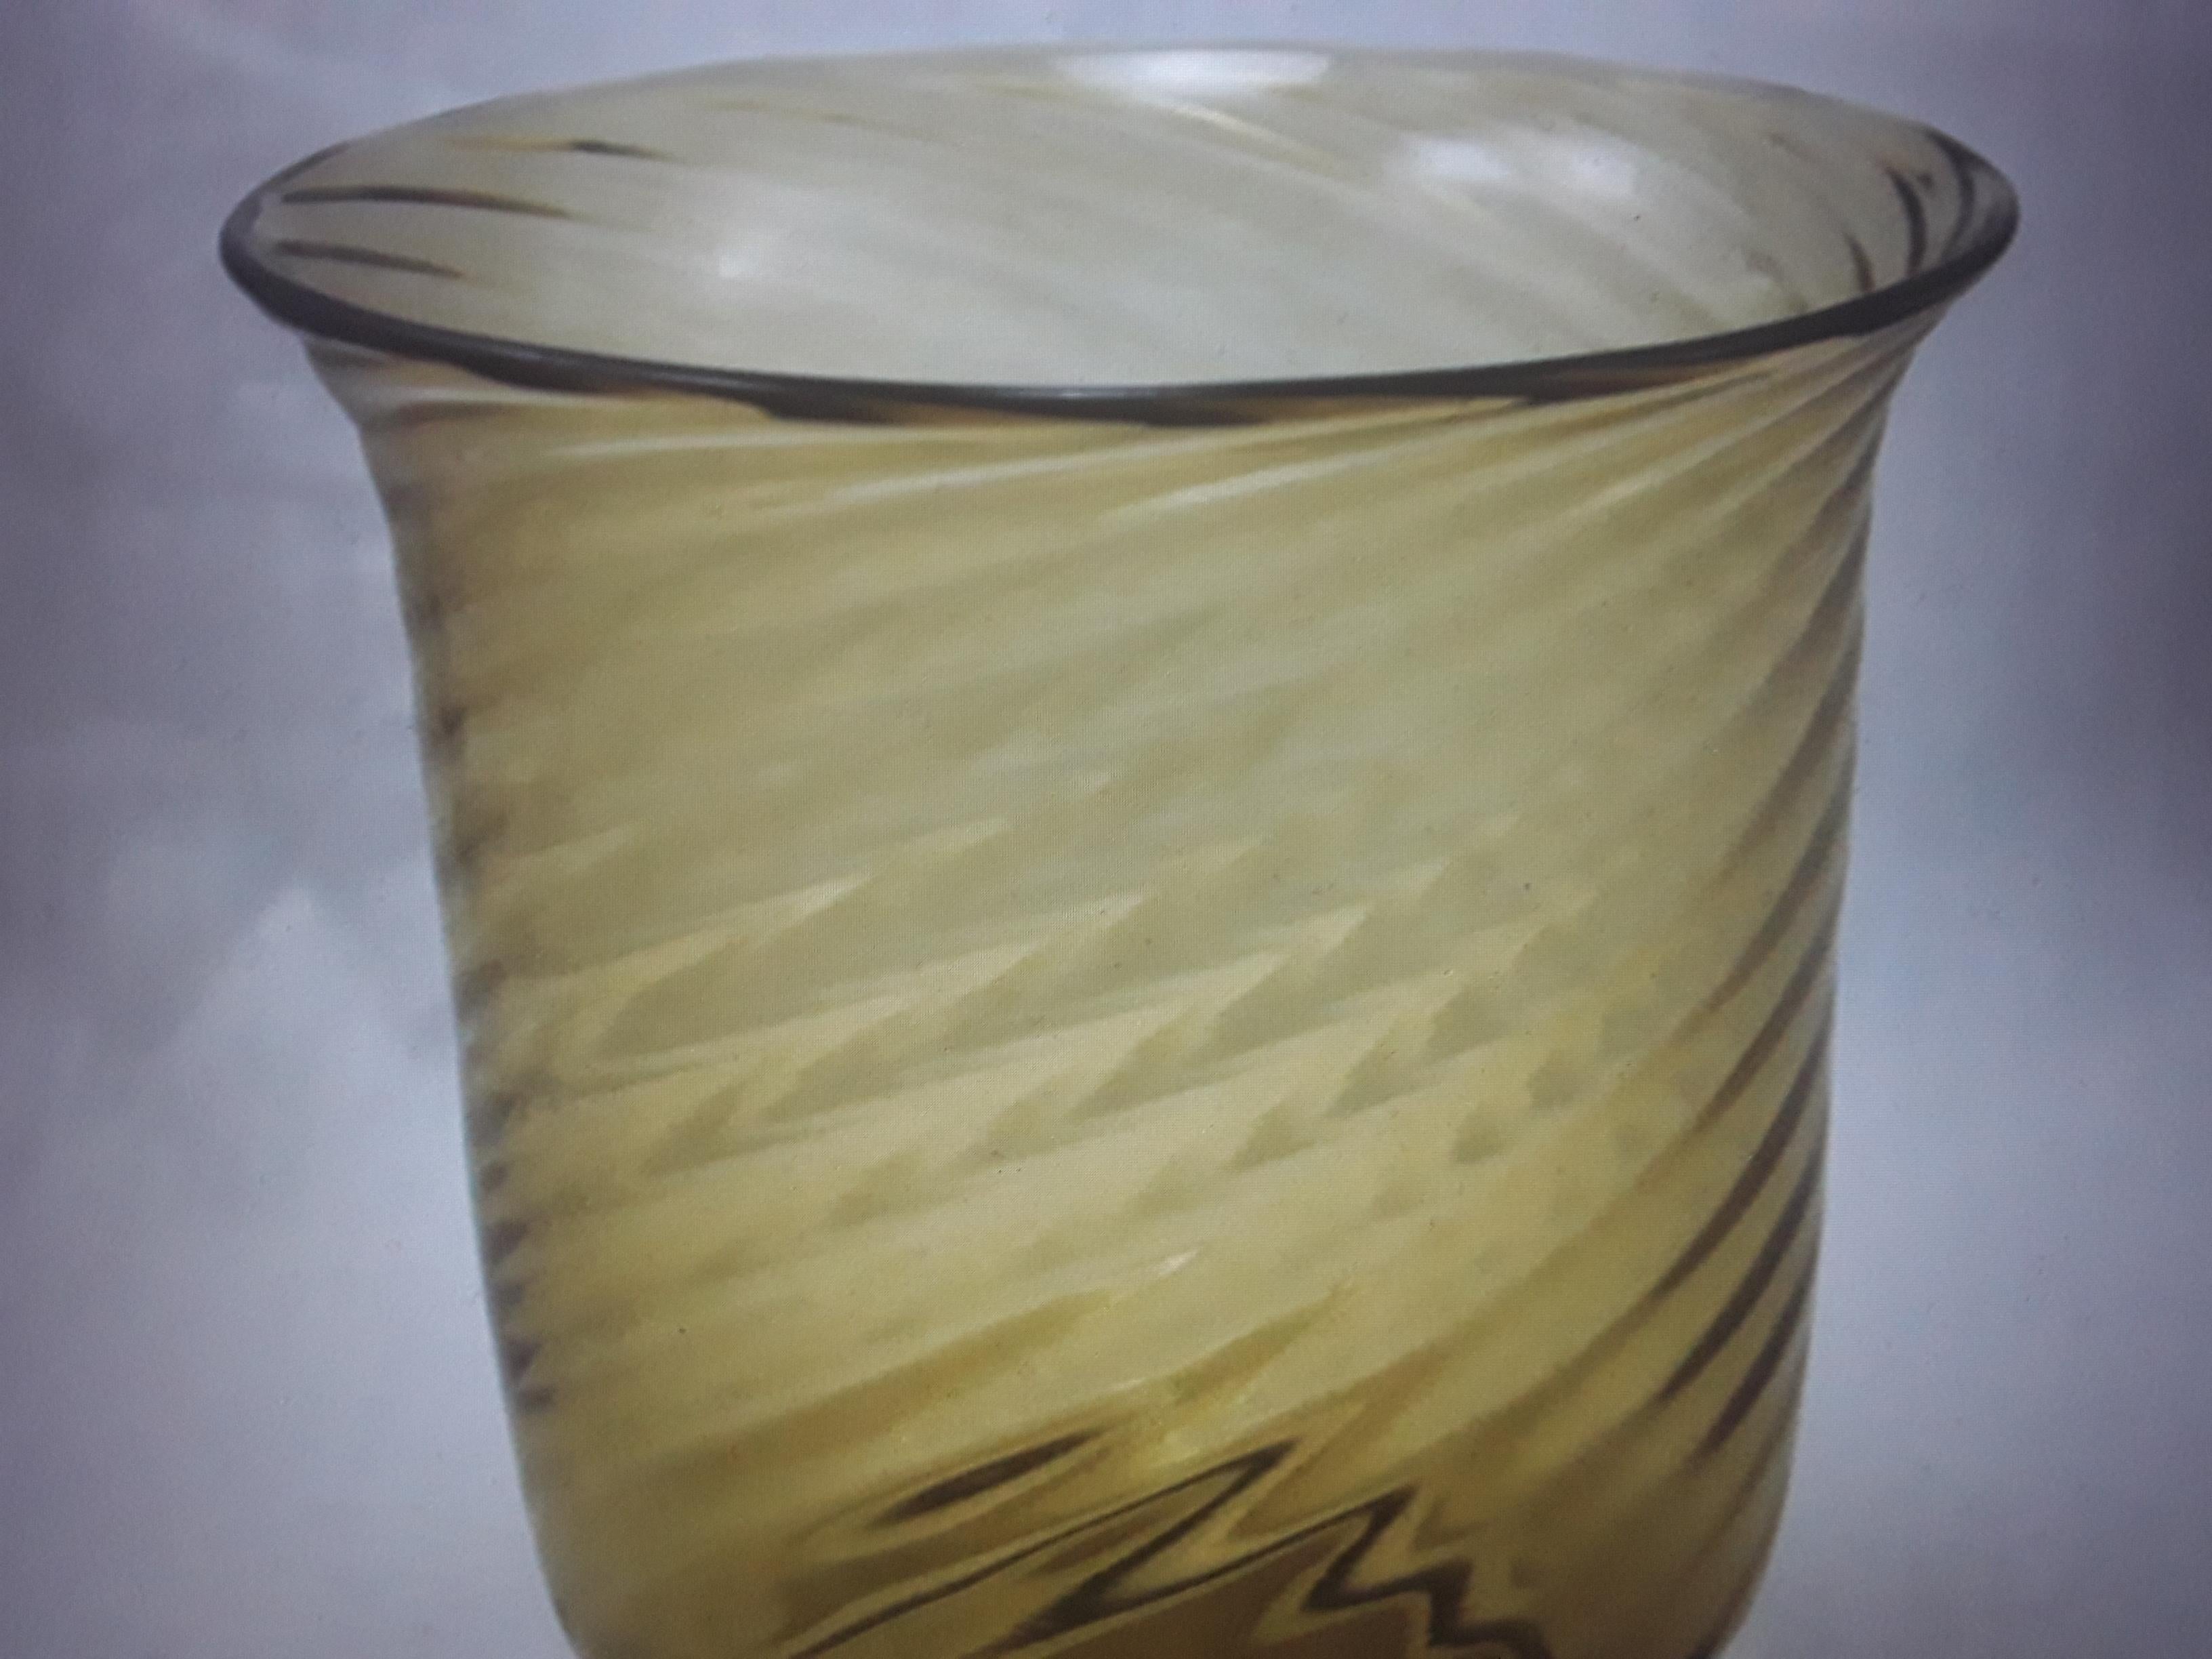 1930's Art Deco Frederic Carders Steuben Art Glass Swirl Pattern Vase. Amber color. On the underside of the vase there is scratching, not noticeable when the vase is upright.